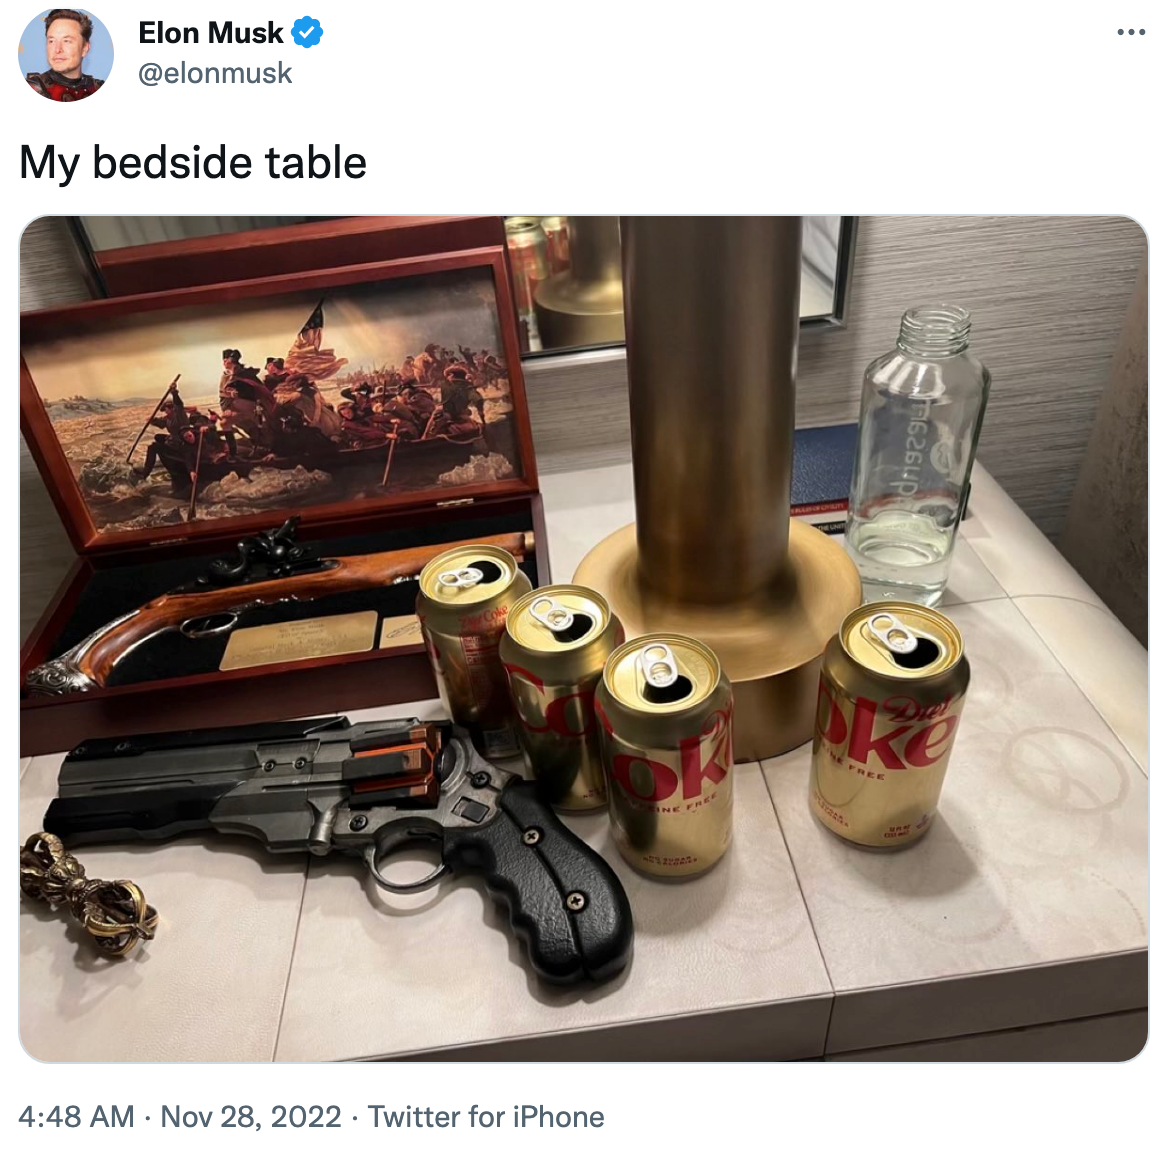 A tweet from Elon Musk, showing his bedside table with some guns and also four cans of Caffeine Free Diet Coke on it.